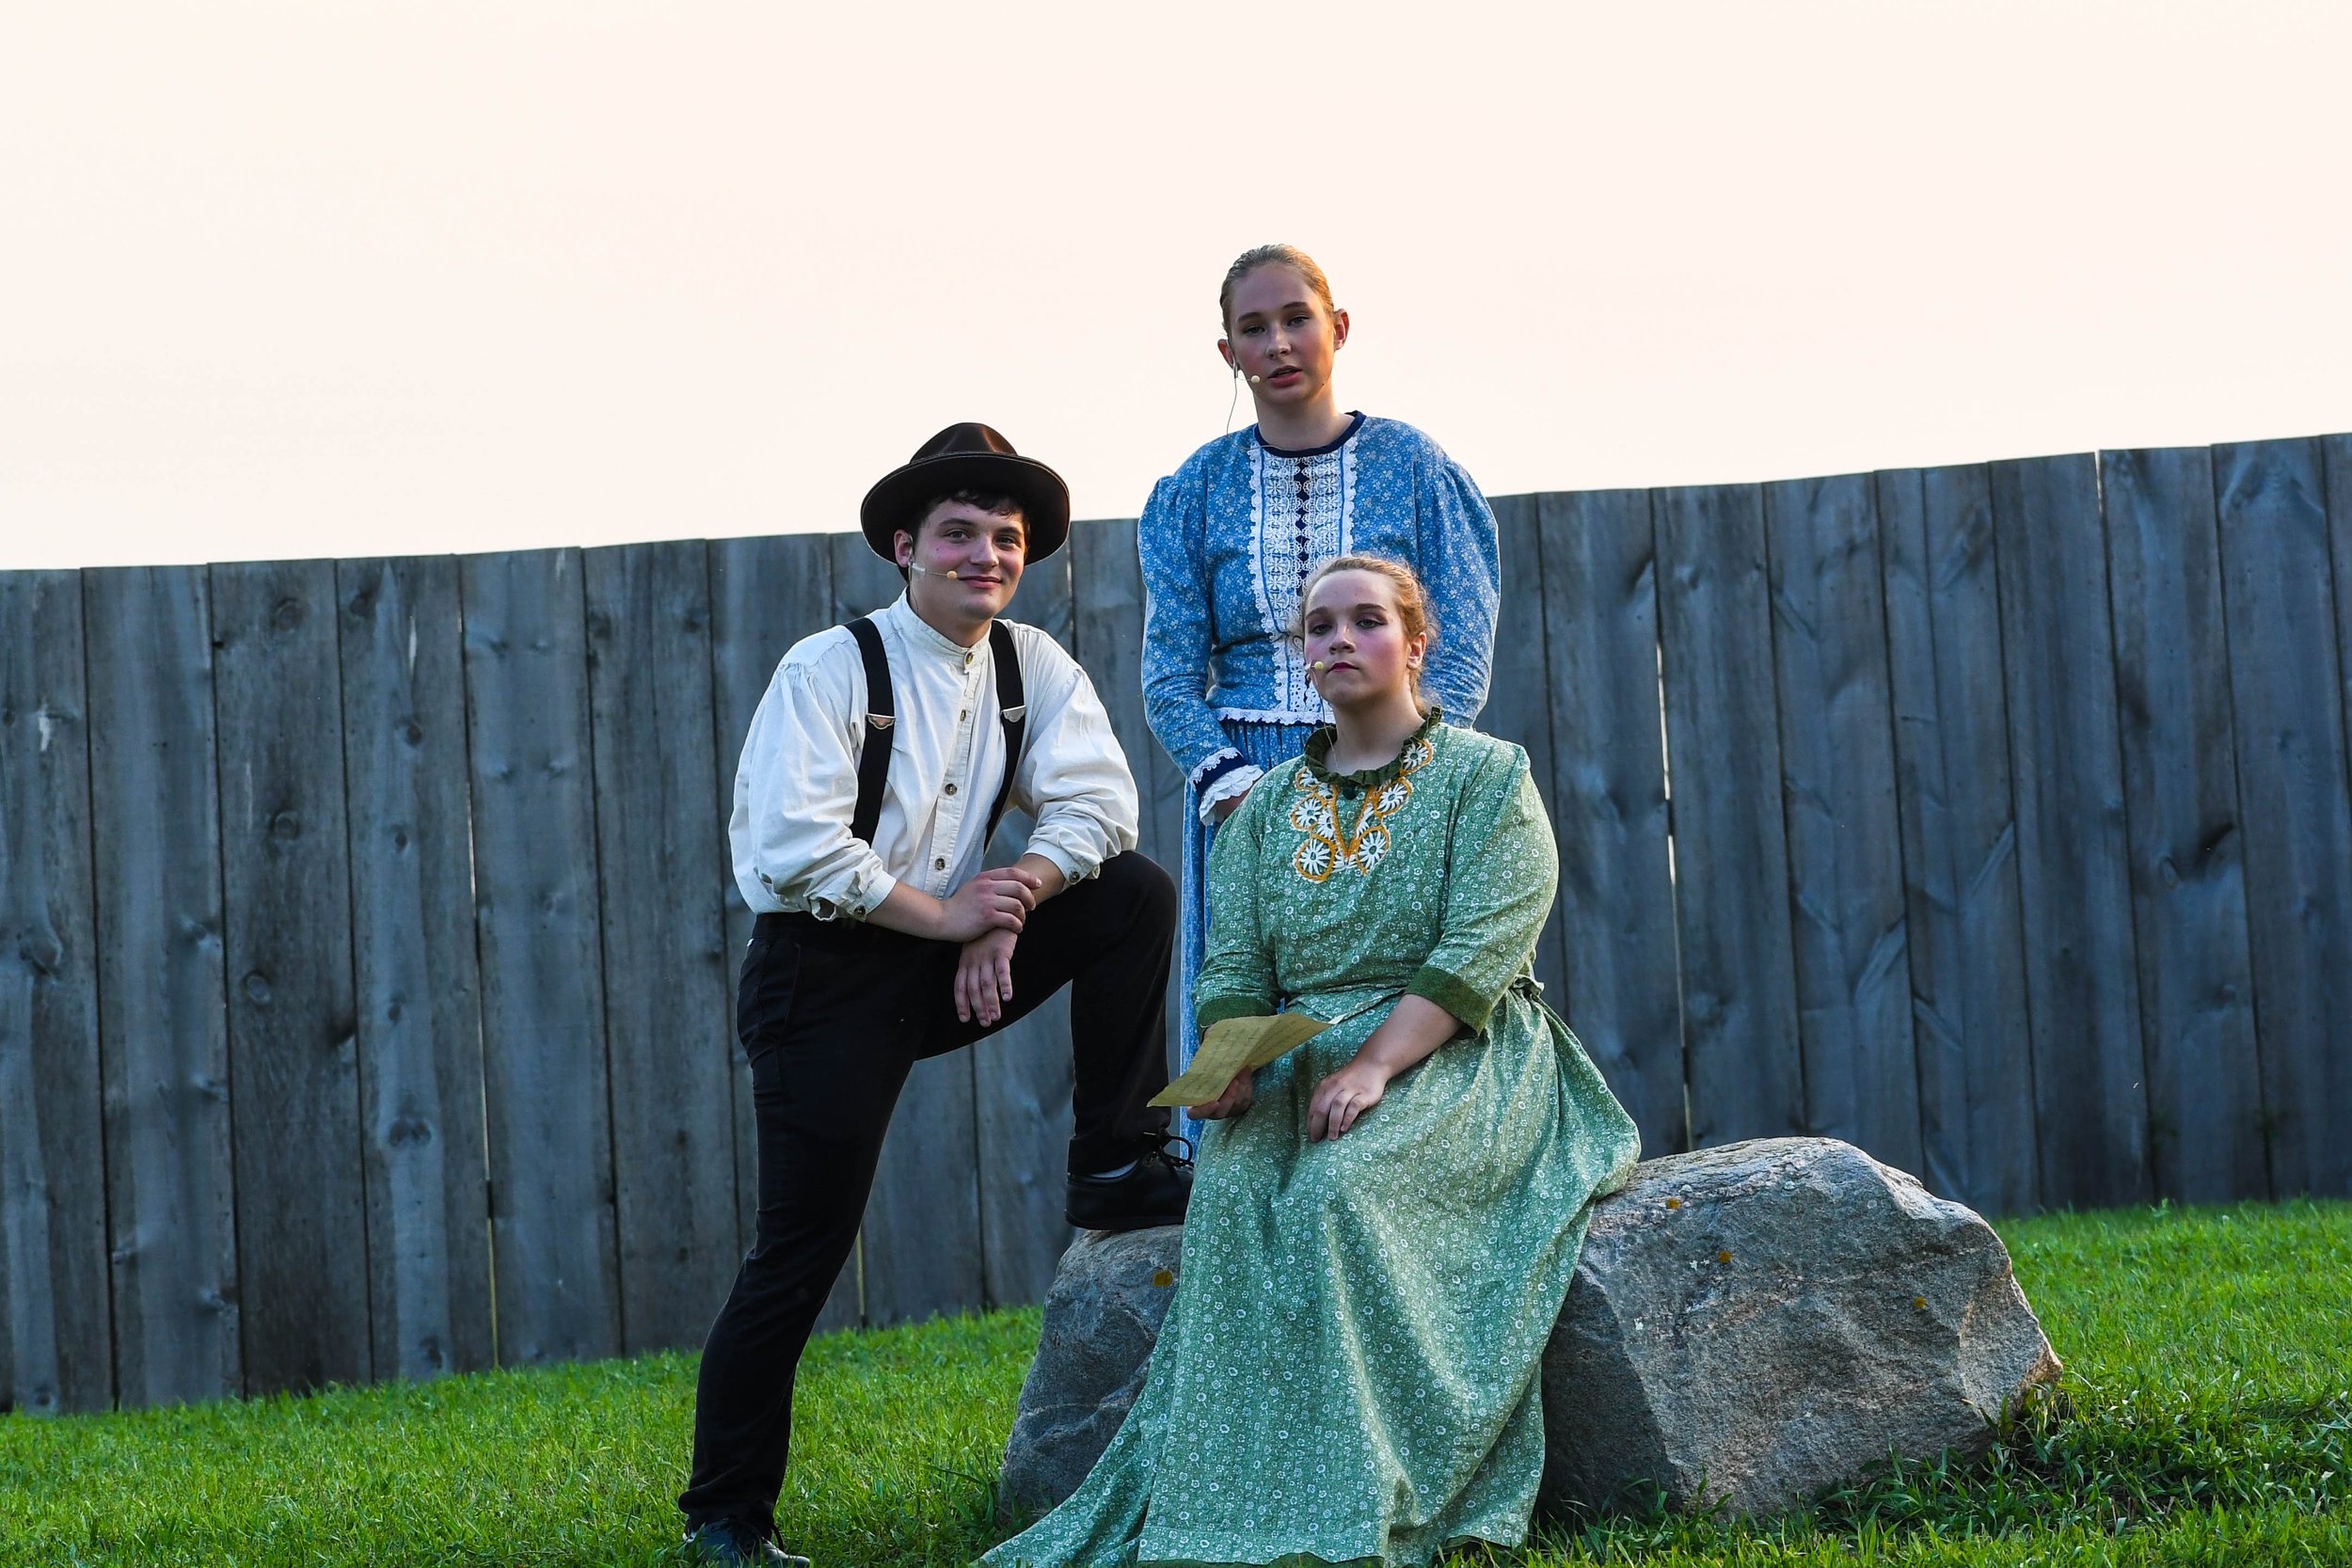 072021 Actors at the the Laura Ingalls Wilder Pageant in De Smet, SD.jpg